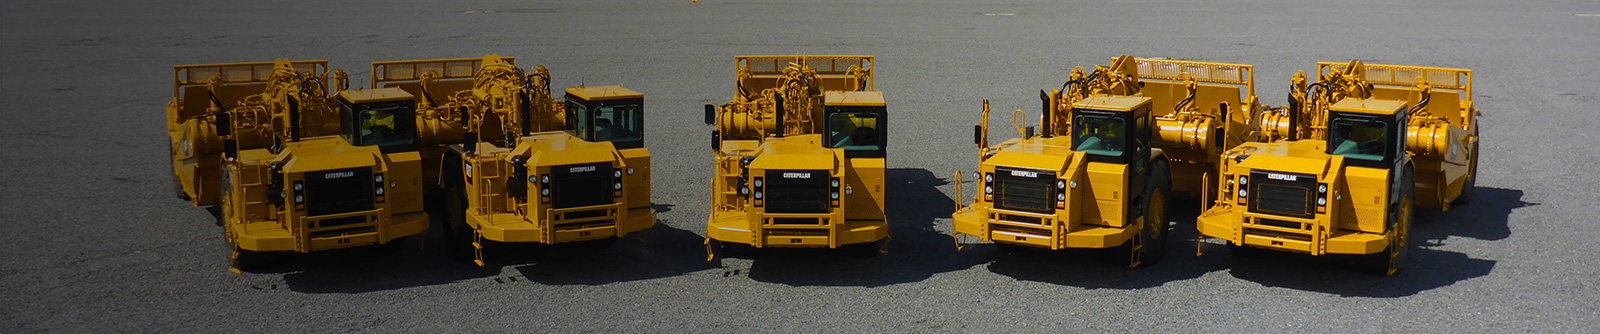 Heavy Equipment For Rental in USA, Canada, Mexico, Ghana, Chile - Southwest Global